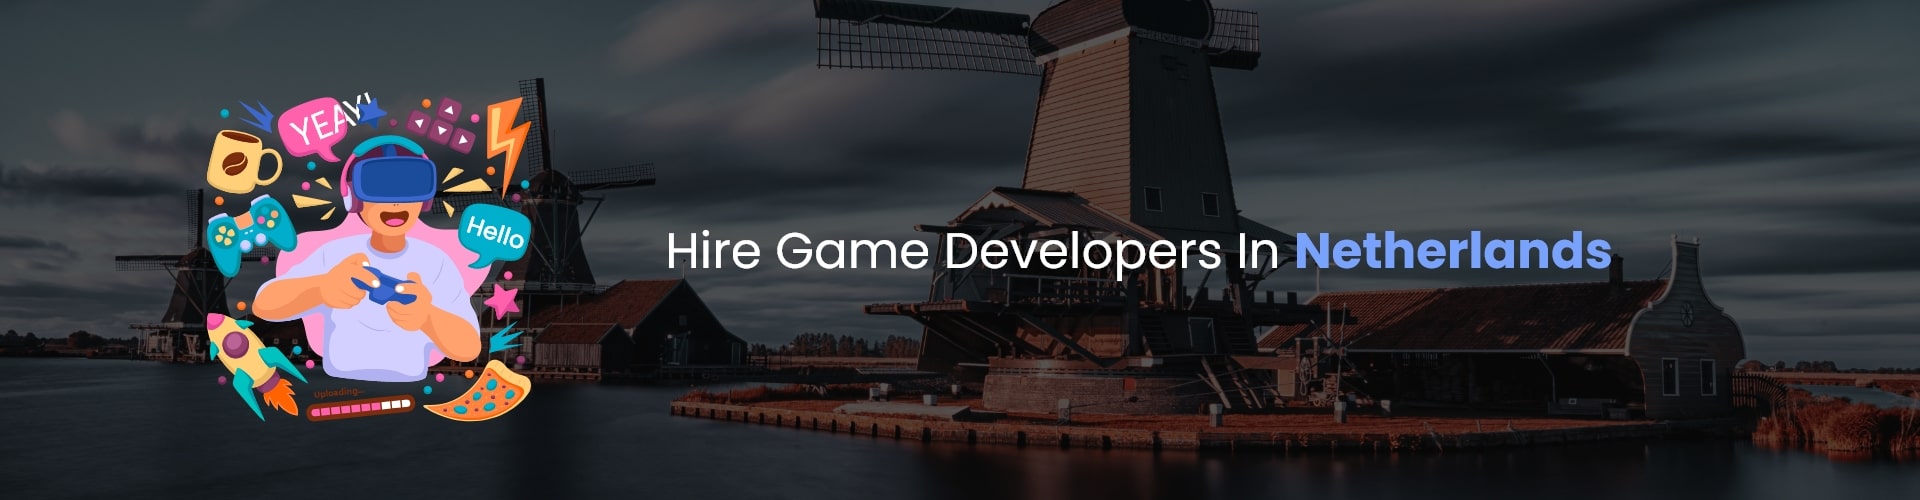 hire game developers in netherlands